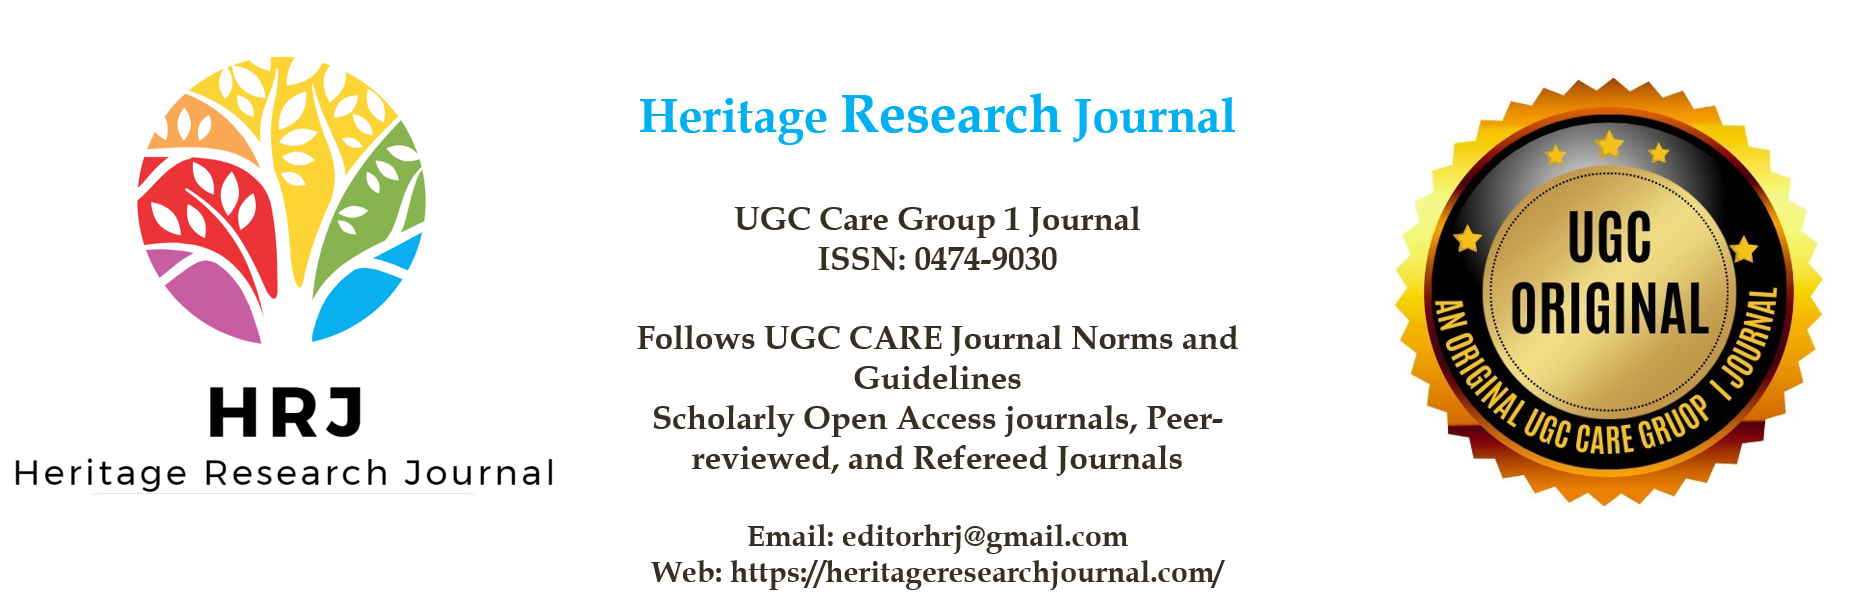 Heritage Research Journal